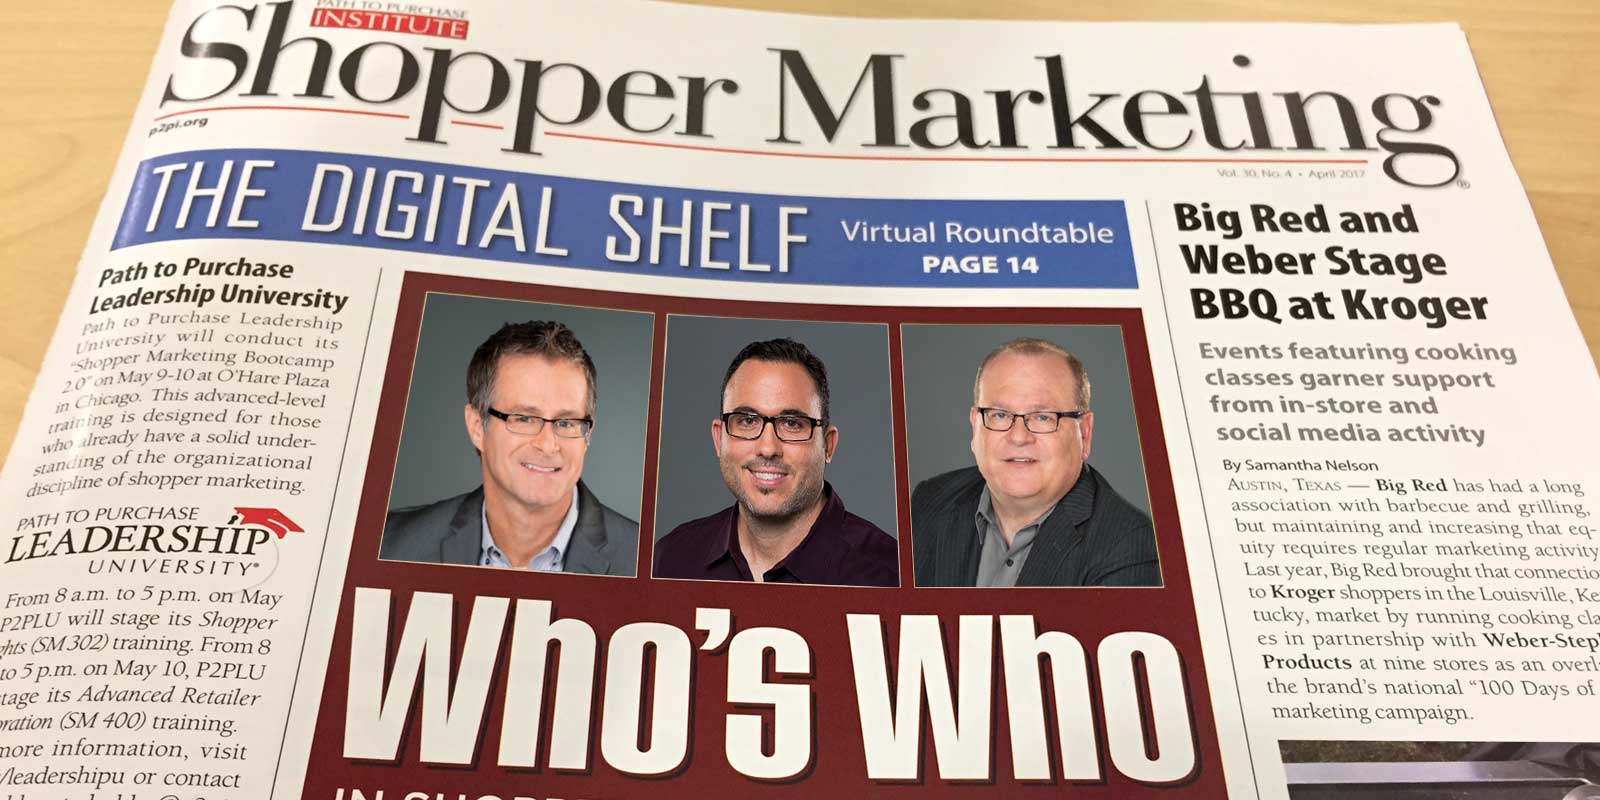 Theory House Leaders Named to The Who’s Who in Shopper Marketing